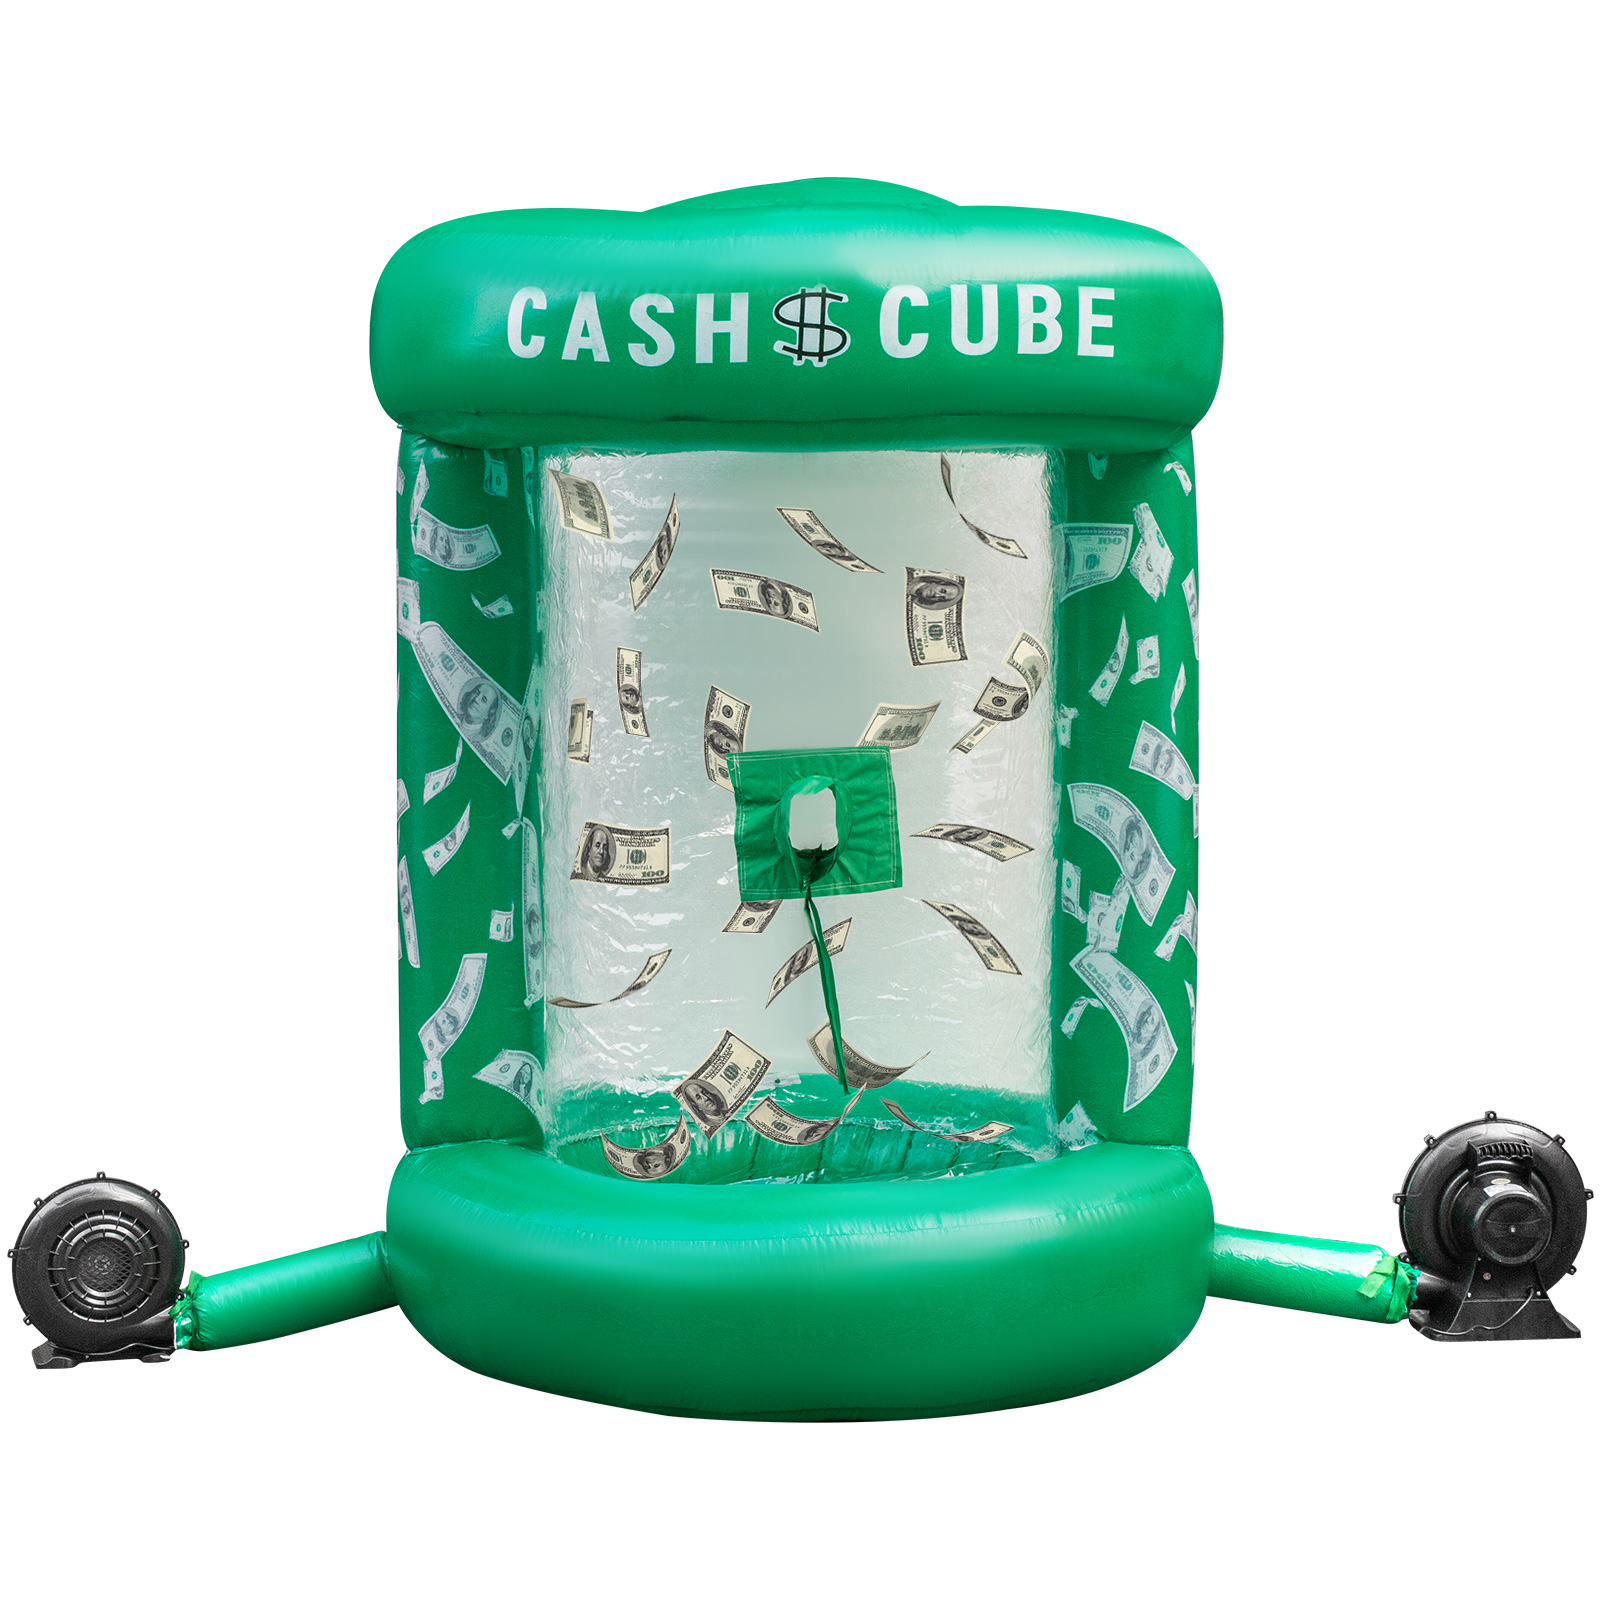 Inflatable Cash Cube Booth Money Grab Machine Advertisment Promotion W/ Blowers от Vevor Many GEOs